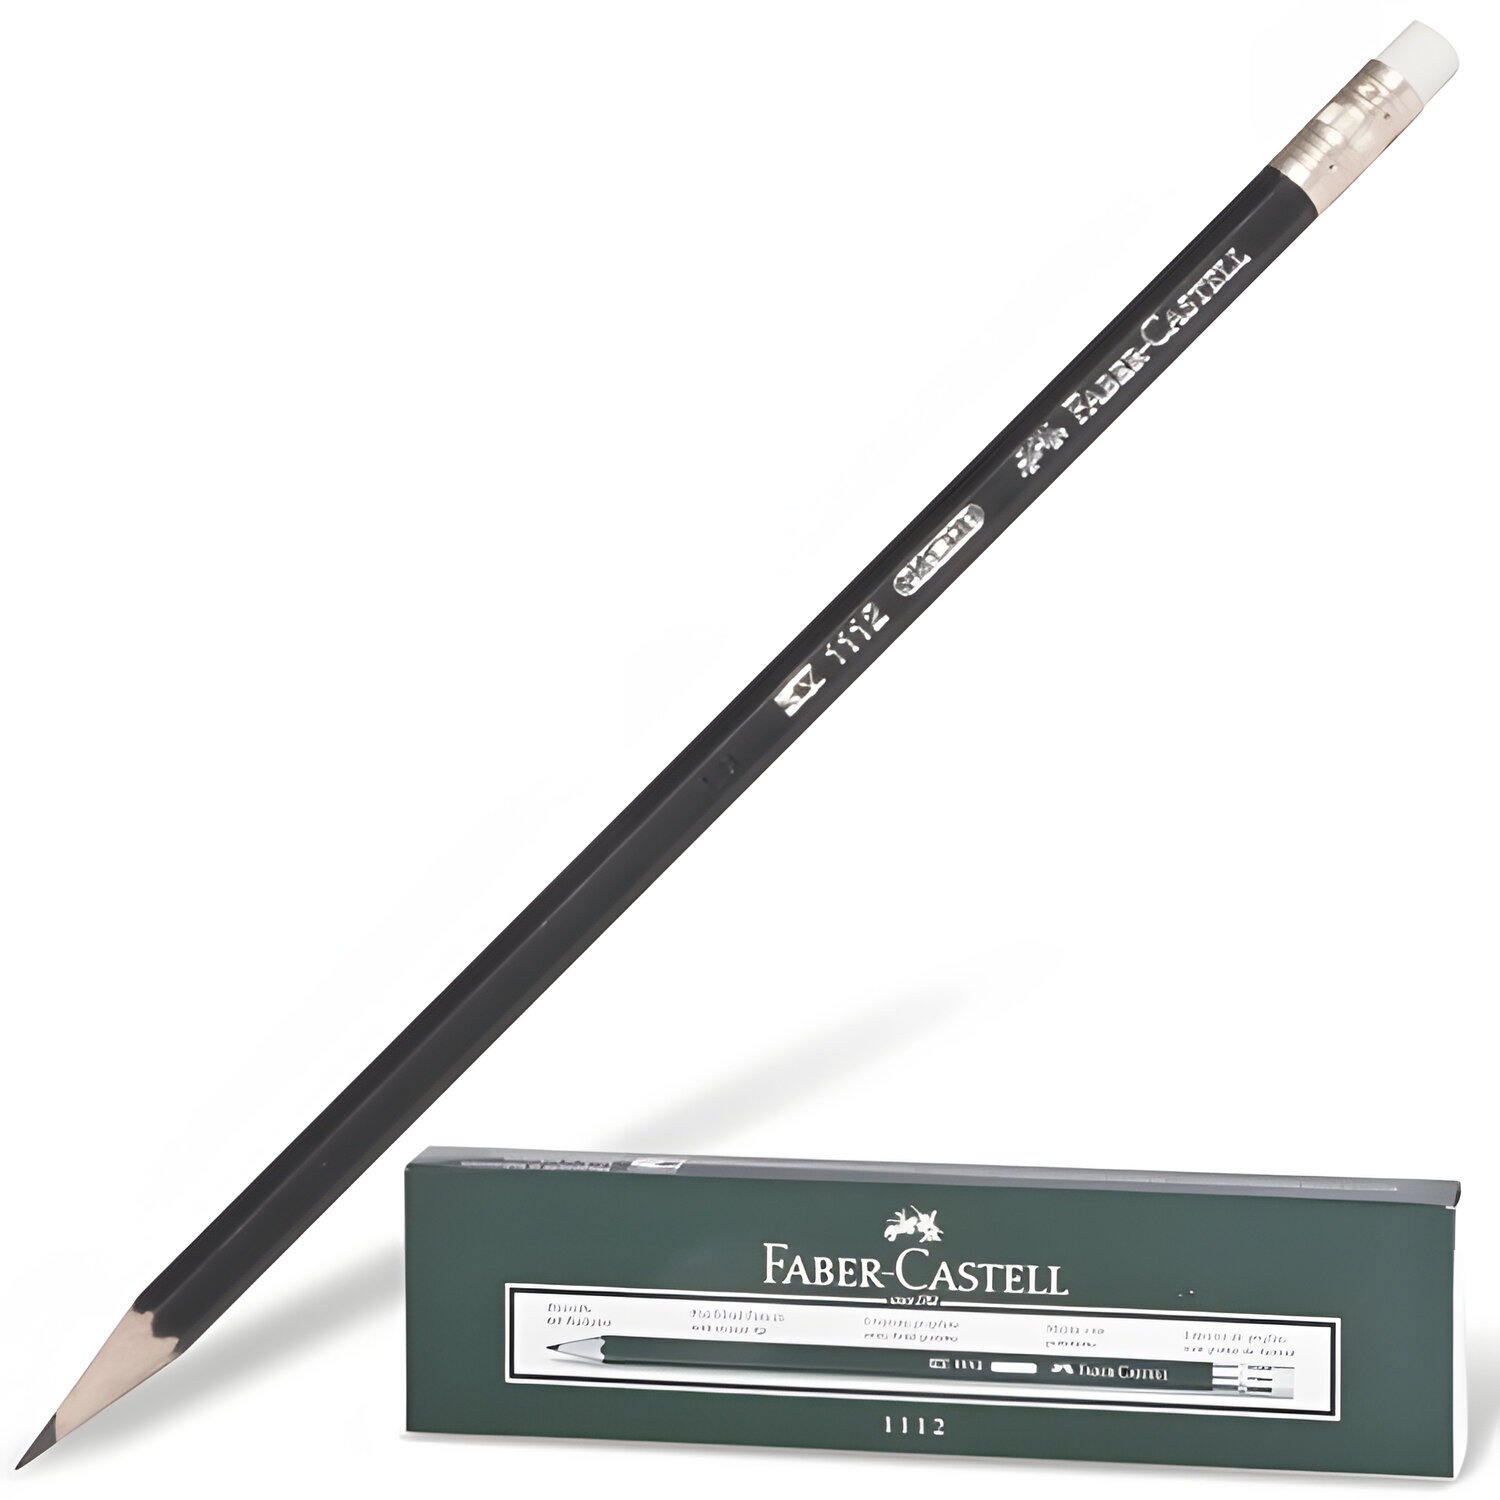  FABER-CASTELL 111200